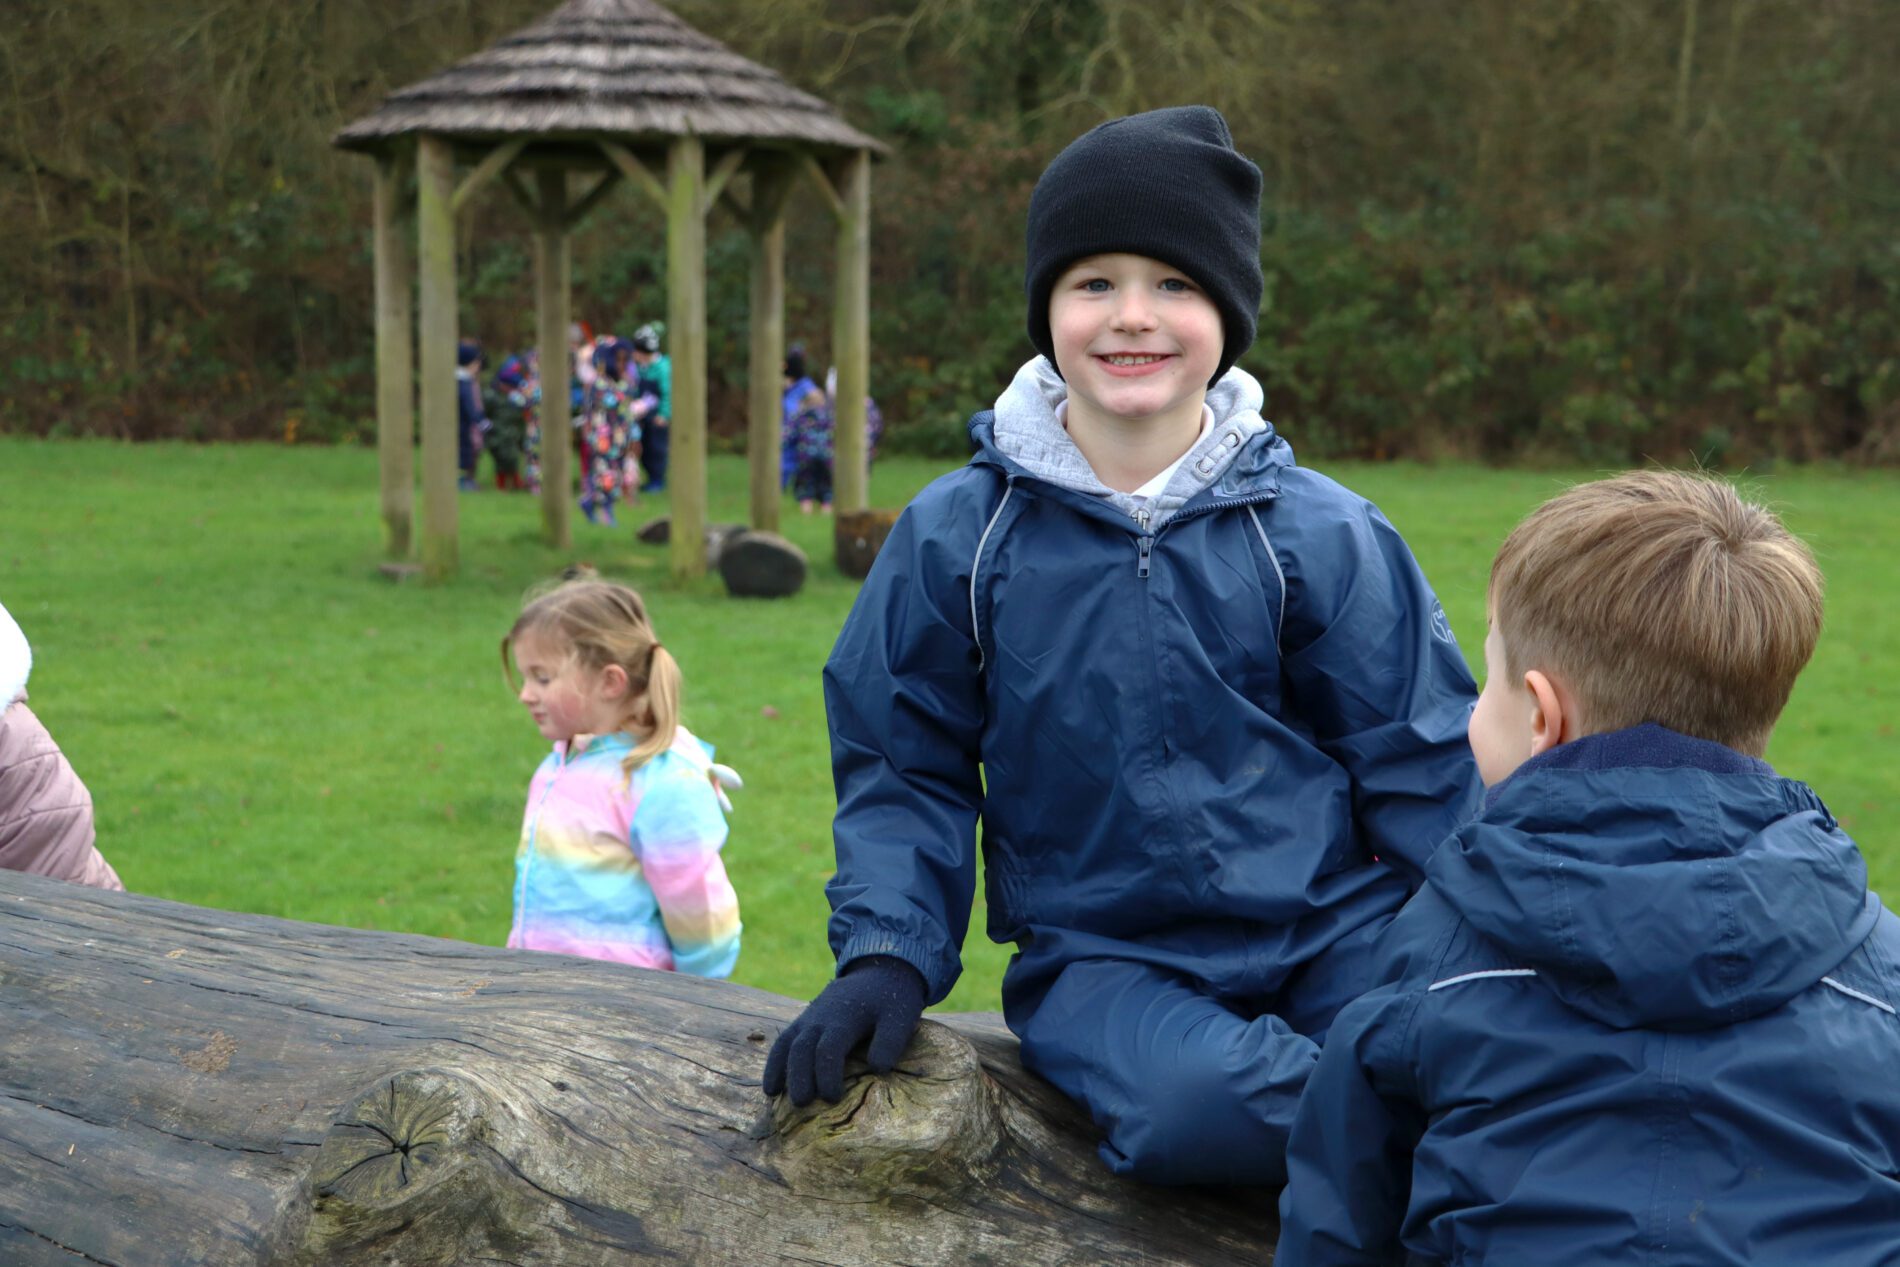 pupils smiling during outdoor learning